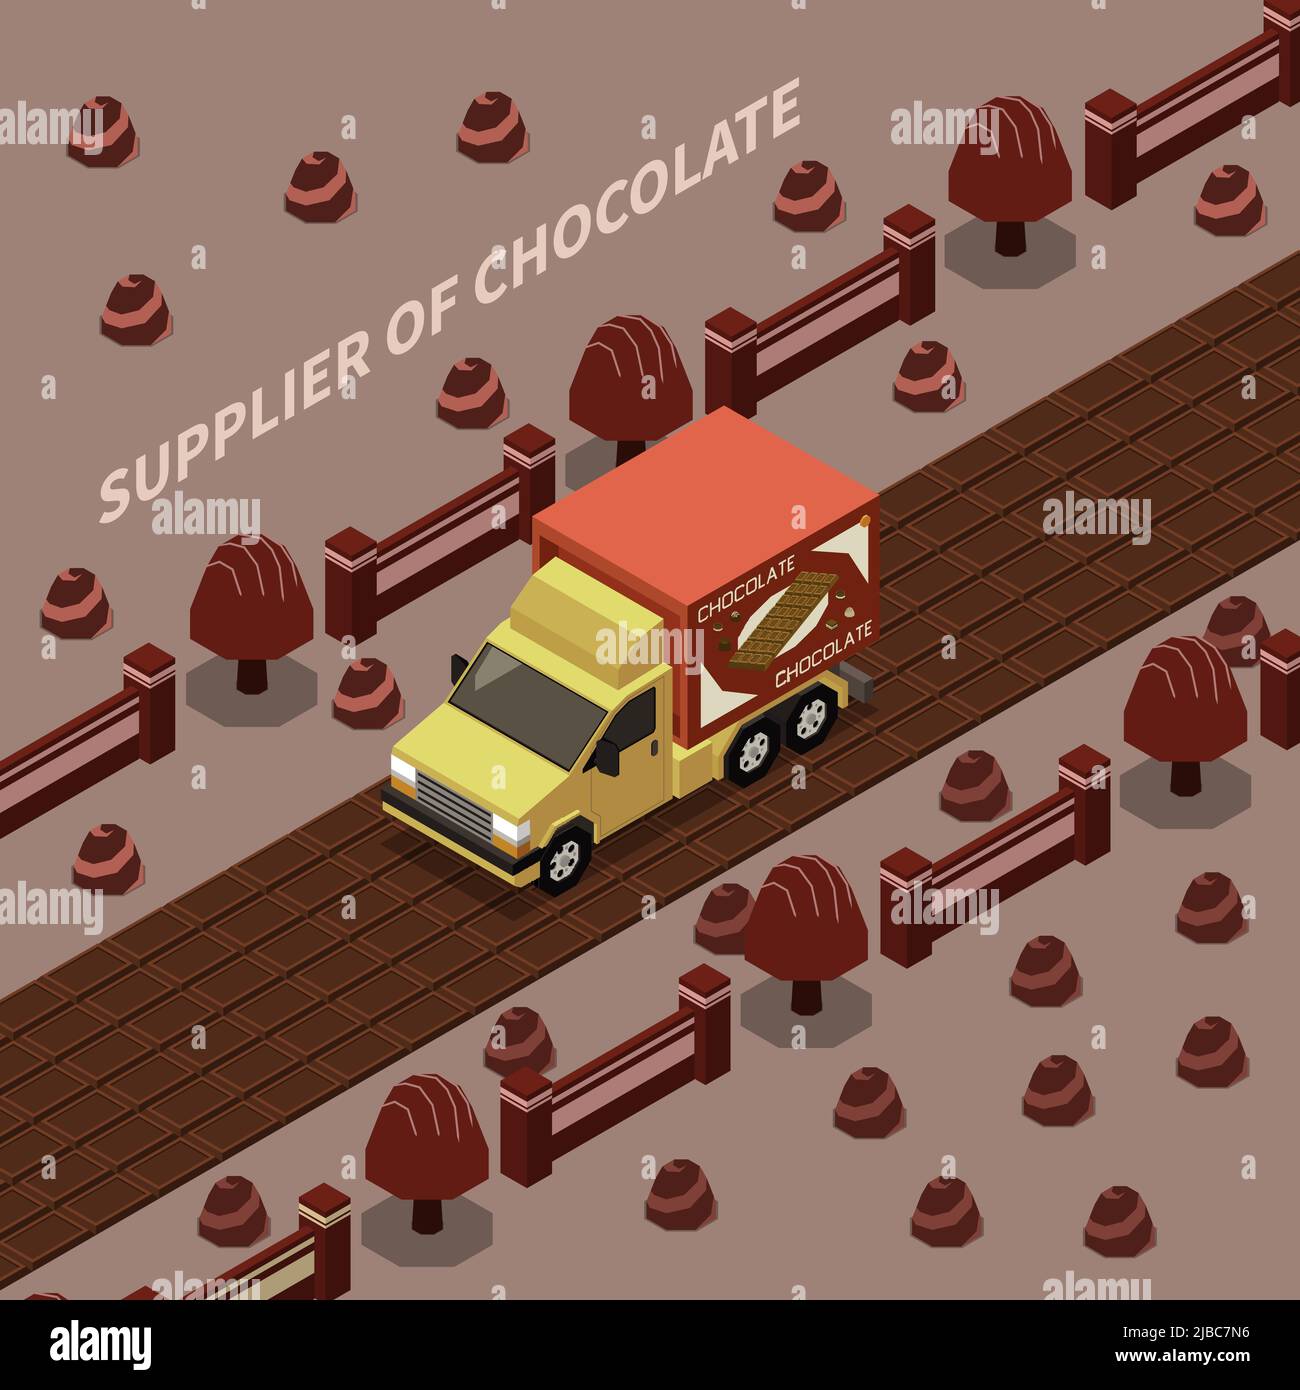 Supplier of chocolate abstract background with delivery truck traveling at chocolate road isomeric vector illustration Stock Vector